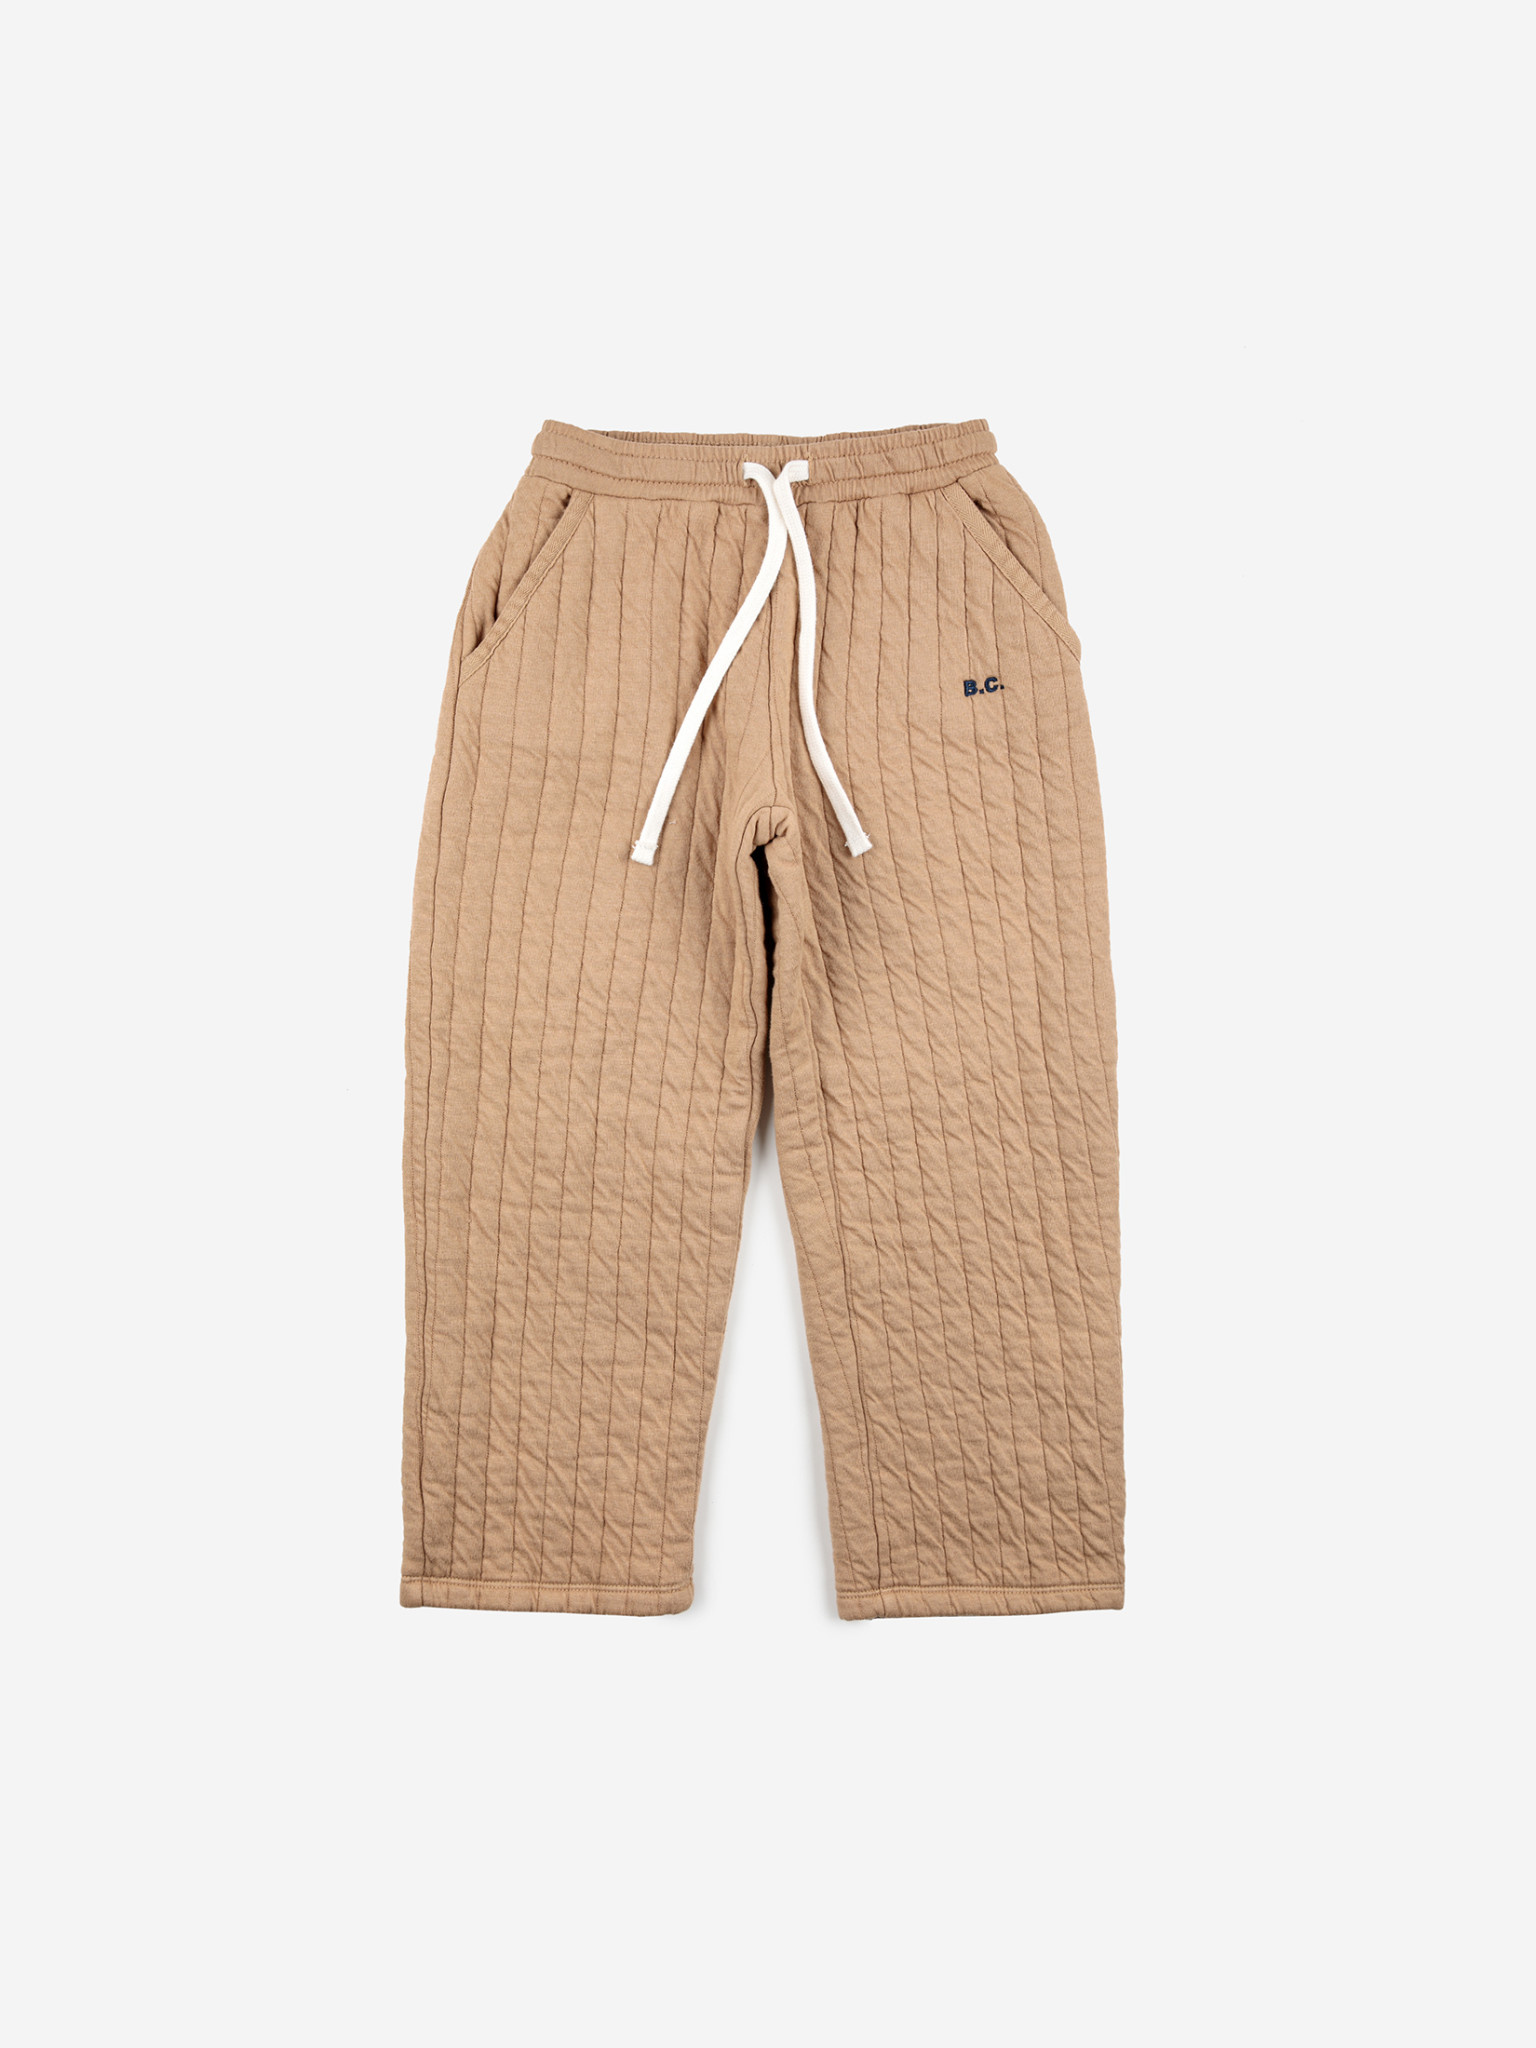 BOBO CHOSES B.C. Quilted Jogging Pants